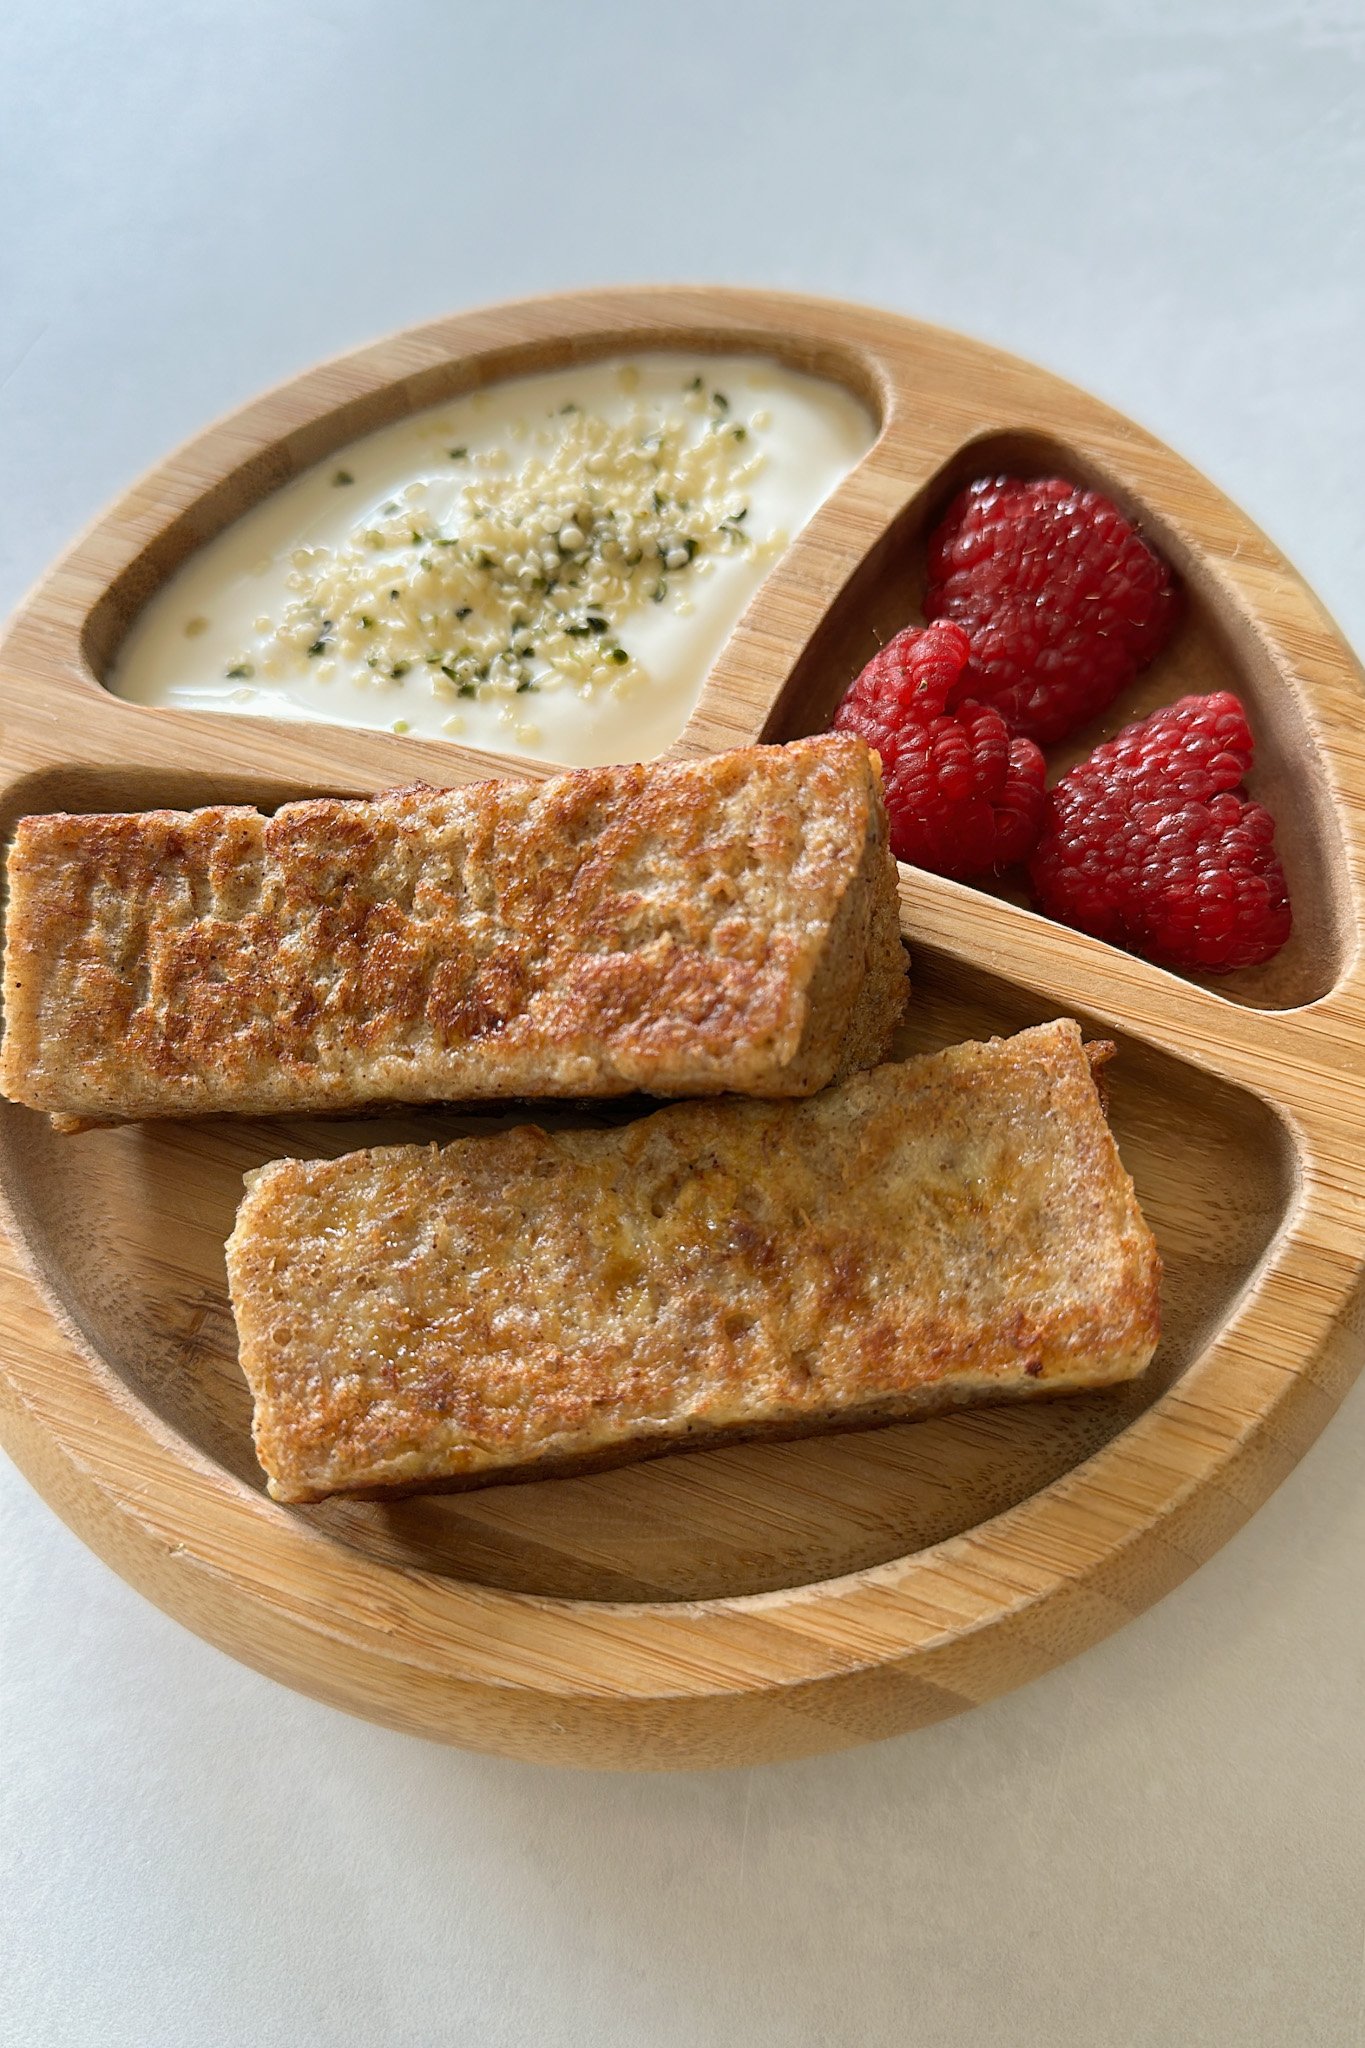 Peanut butter and banana French toast sticks served with yogurt and raspberries.